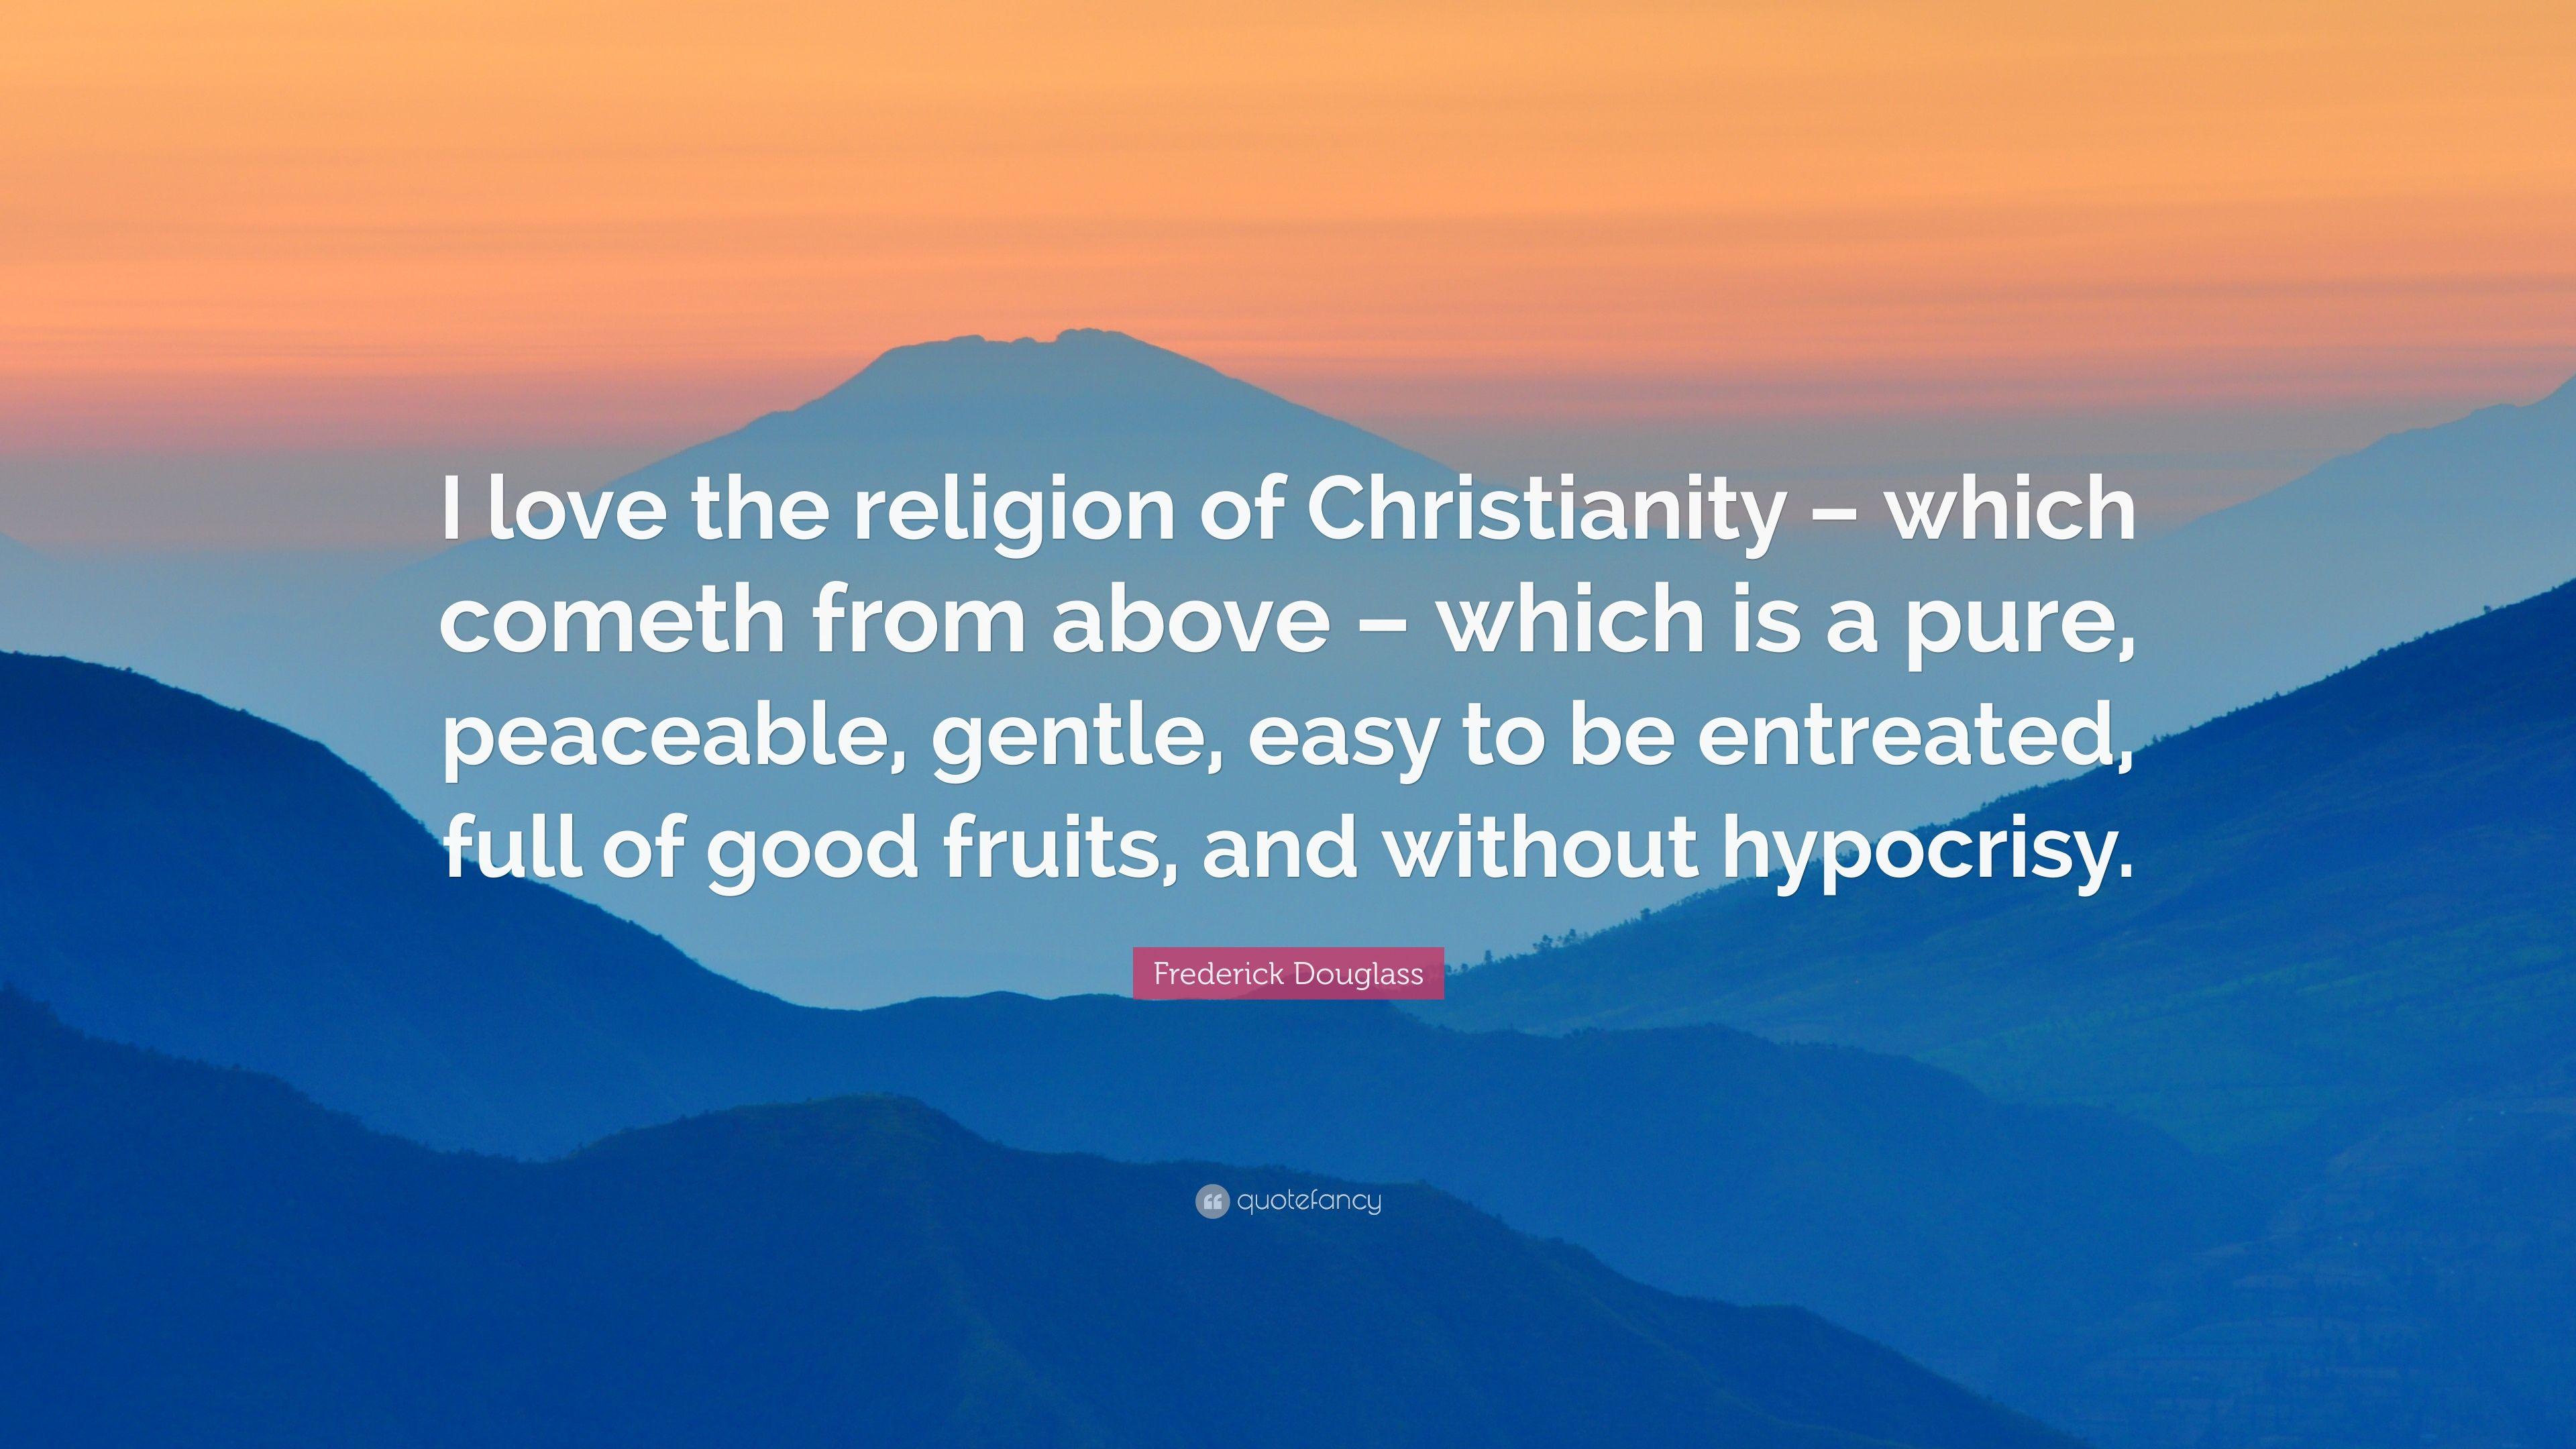 Frederick Douglass Quote: “I love the religion of Christianity